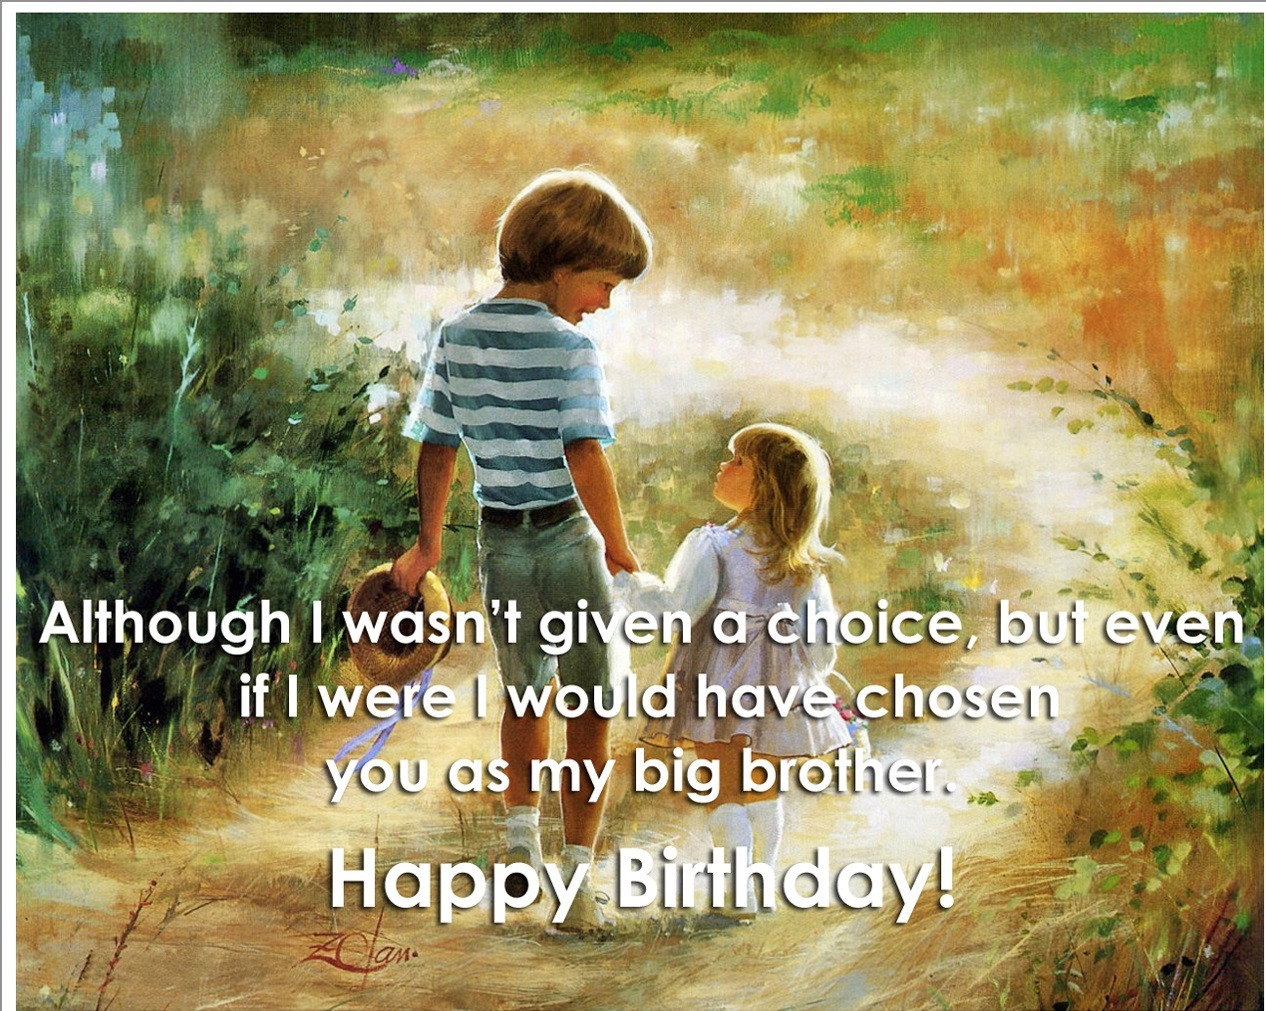 Quote For Brothers Birthday
 Cute Happy Birthday Quotes wishes for brother This Blog